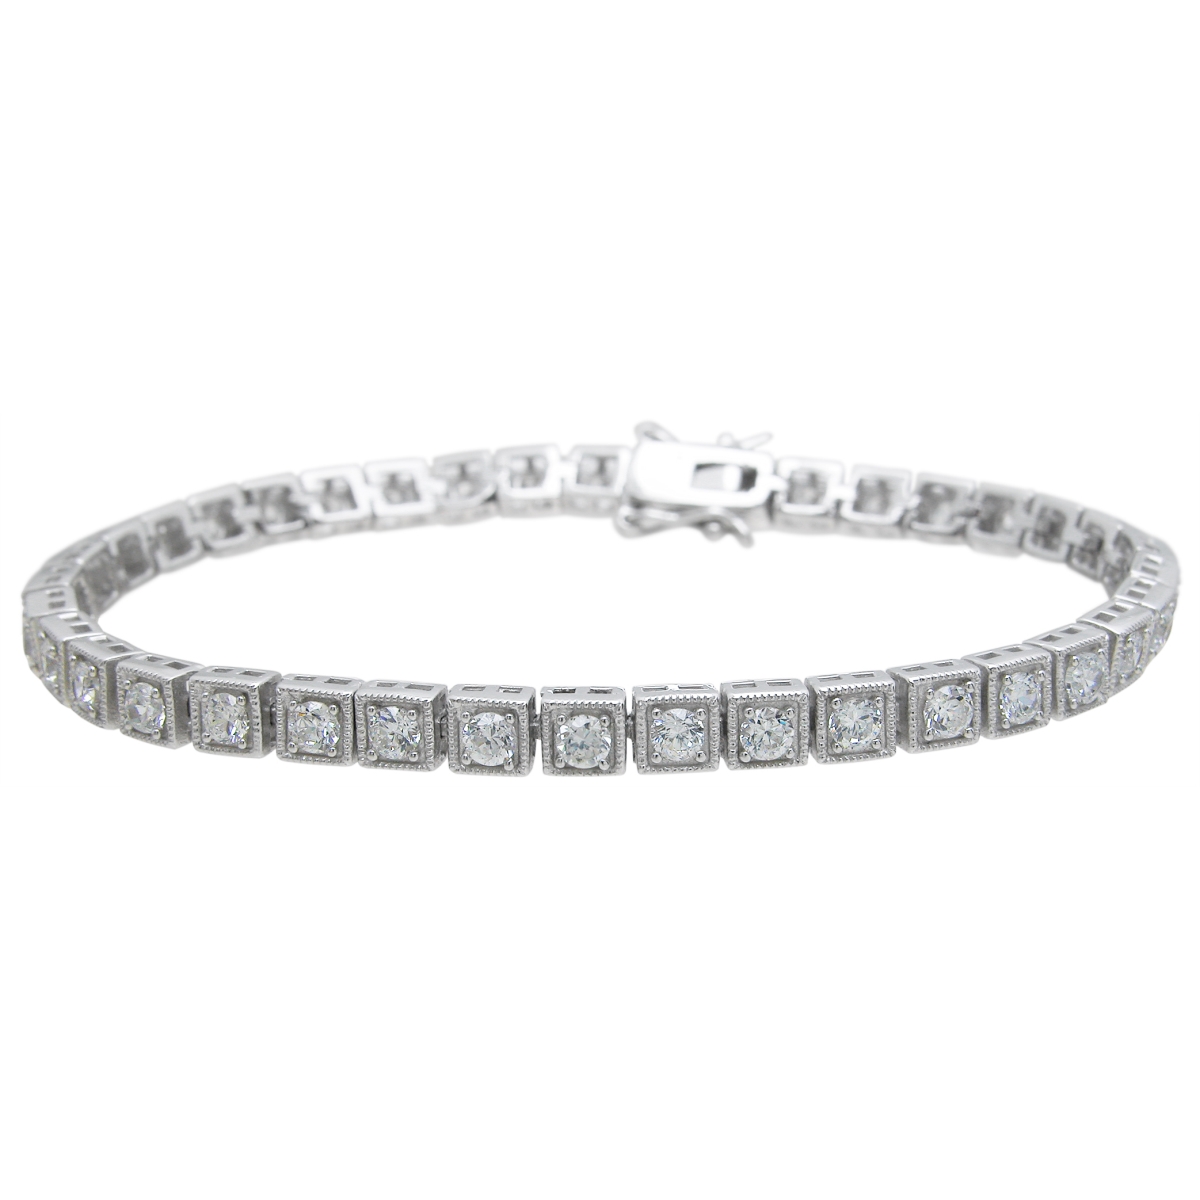 Kkb6904 Brands Sterling Silver High Polish Round Cut Cubic Zirconia Anitque Style Bracelet